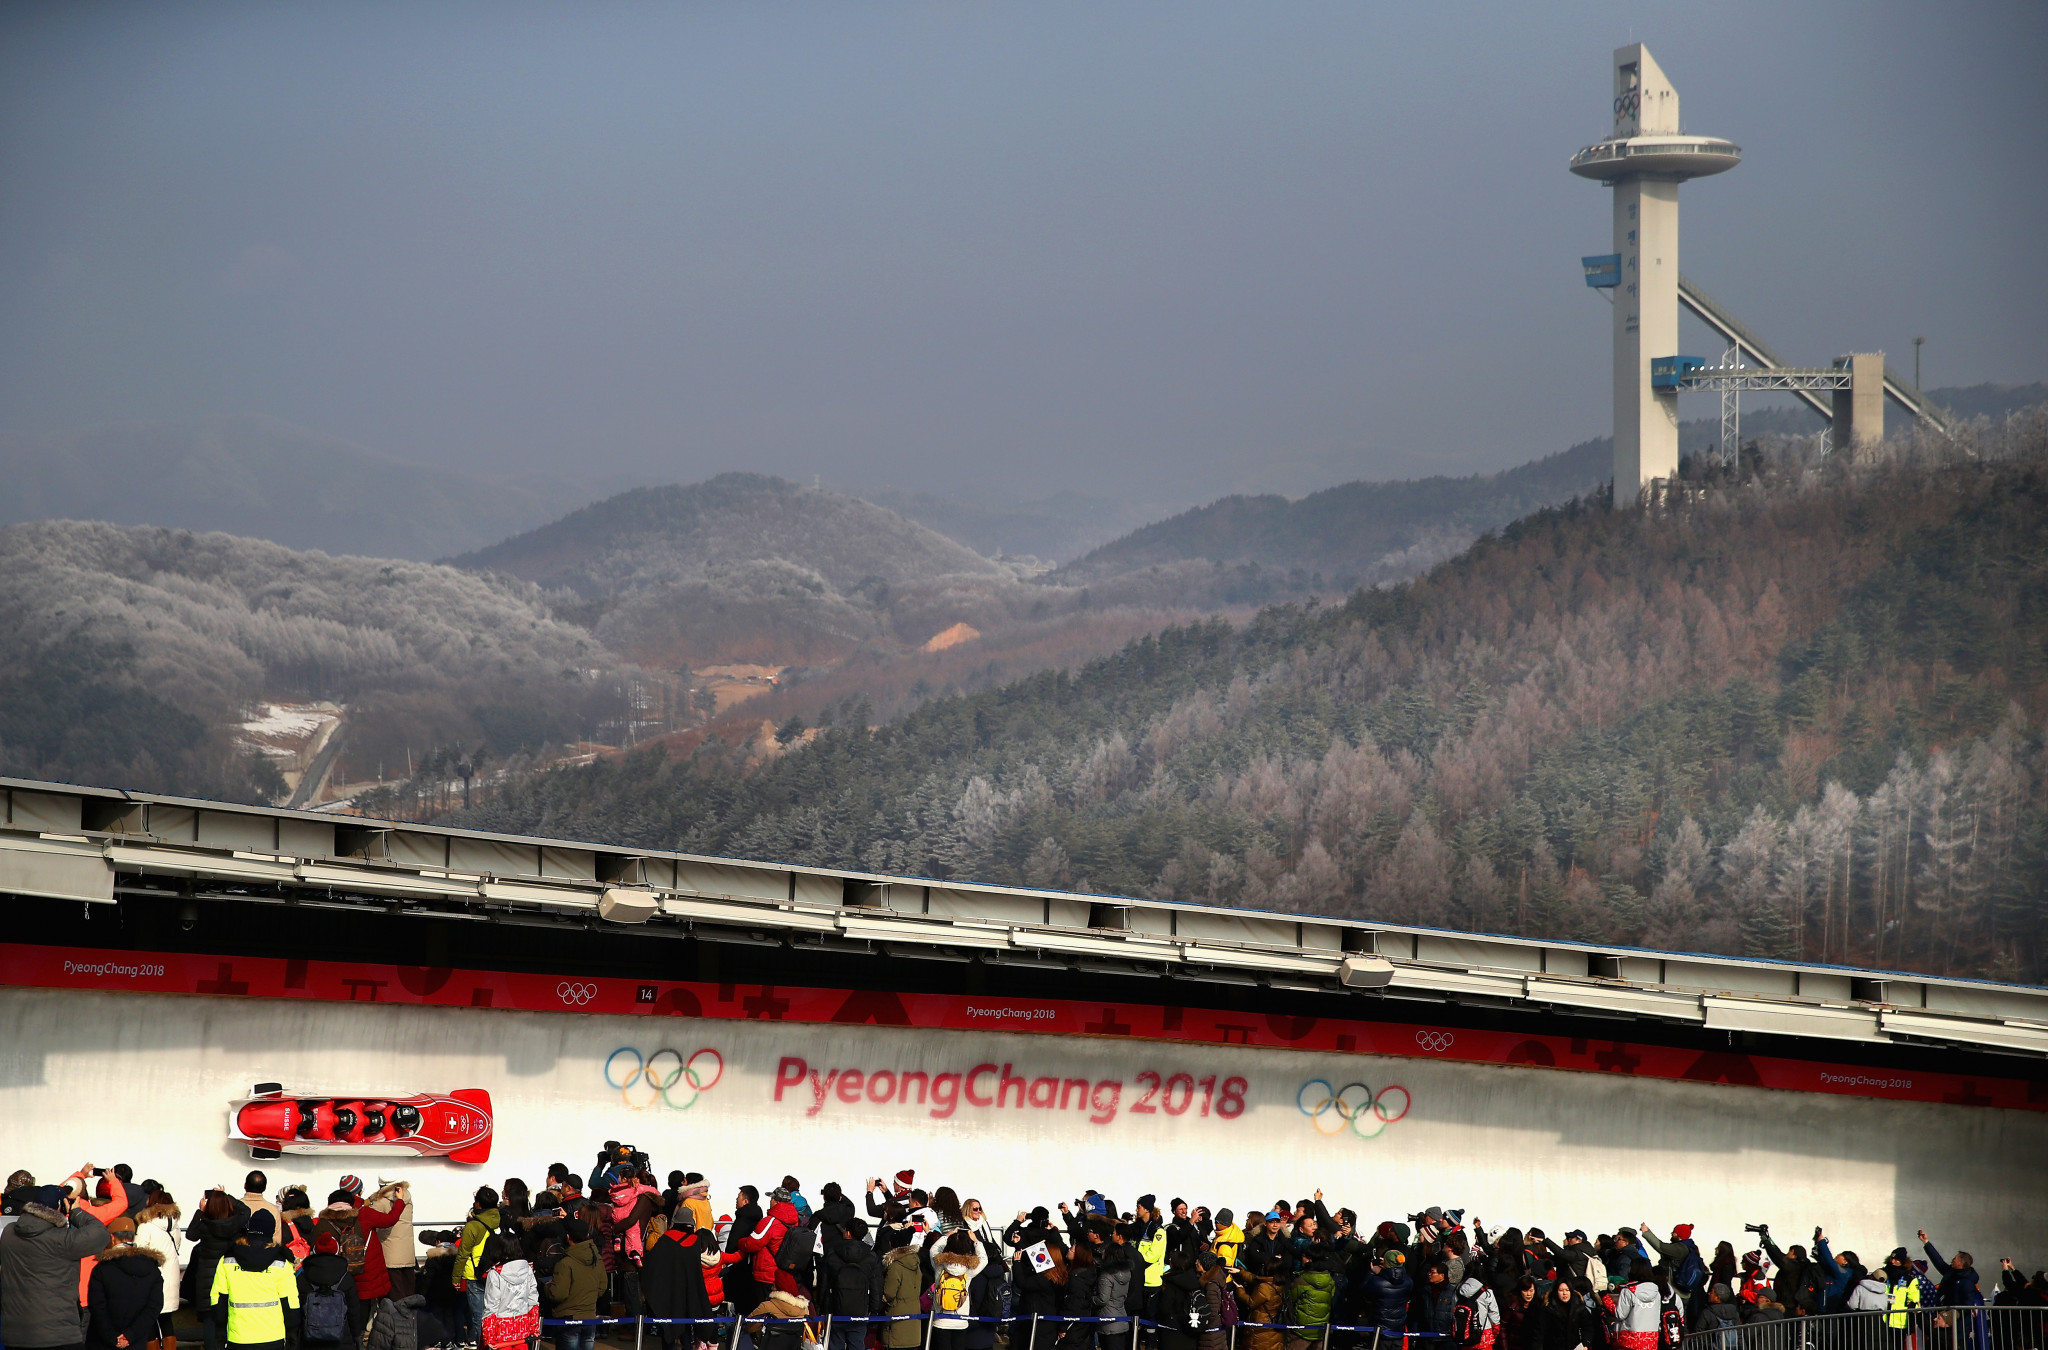 Pyeongchang hosted the Winter Olympics in 2018 but has not hosted a World Cup event since ©Getty Images